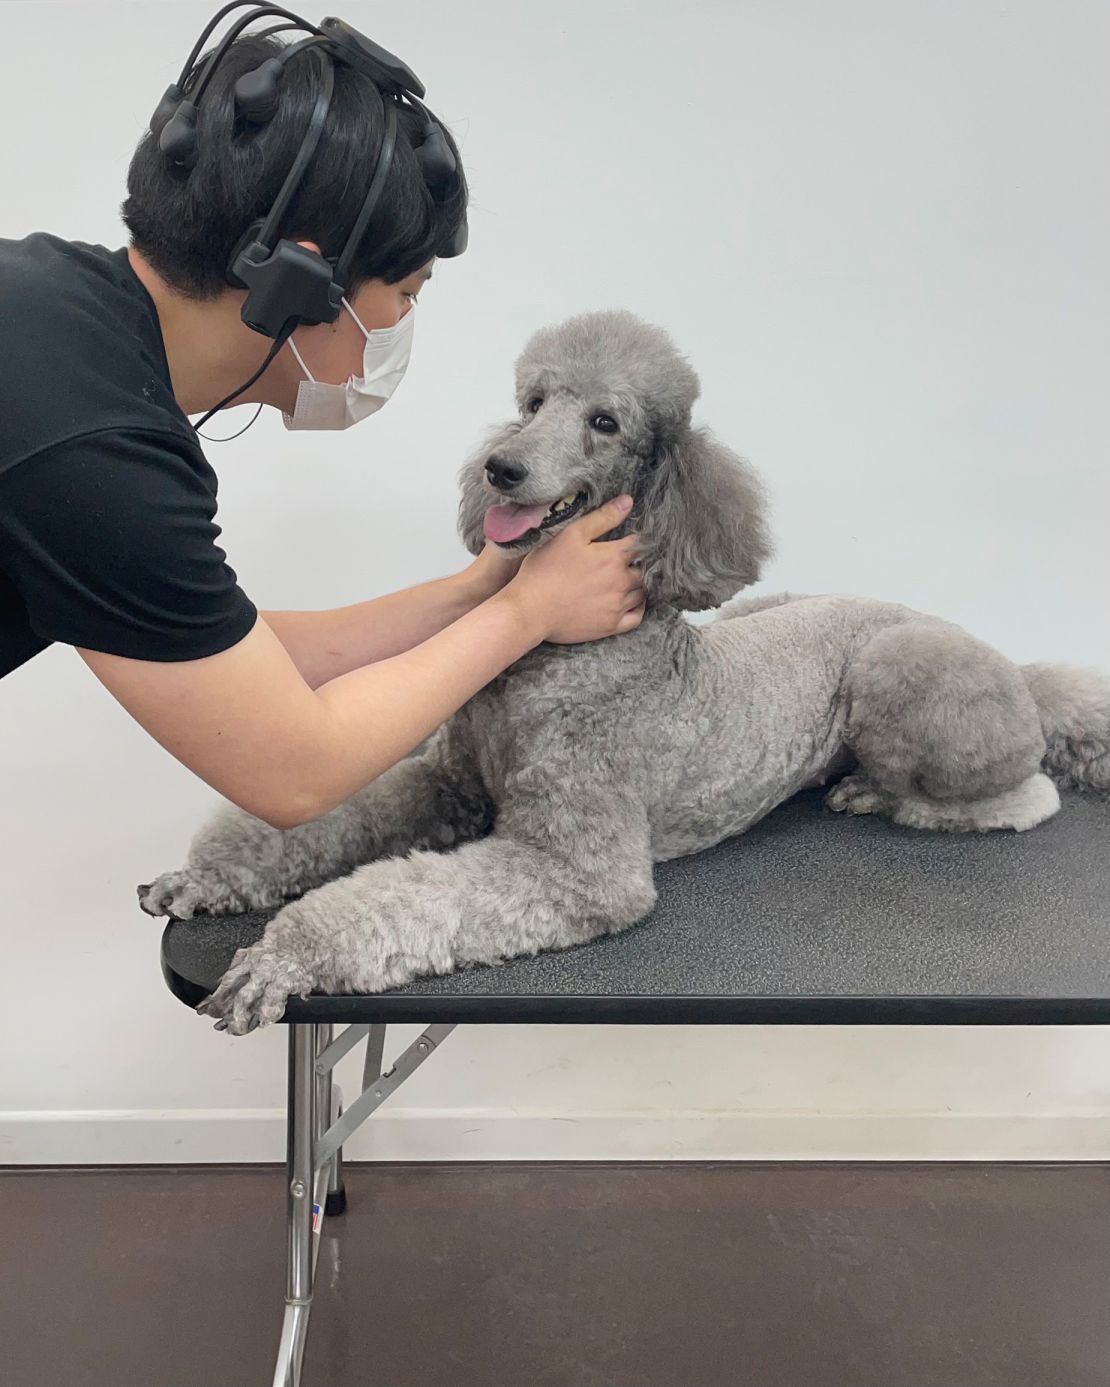 A study participant pets the poodle involved in the research.